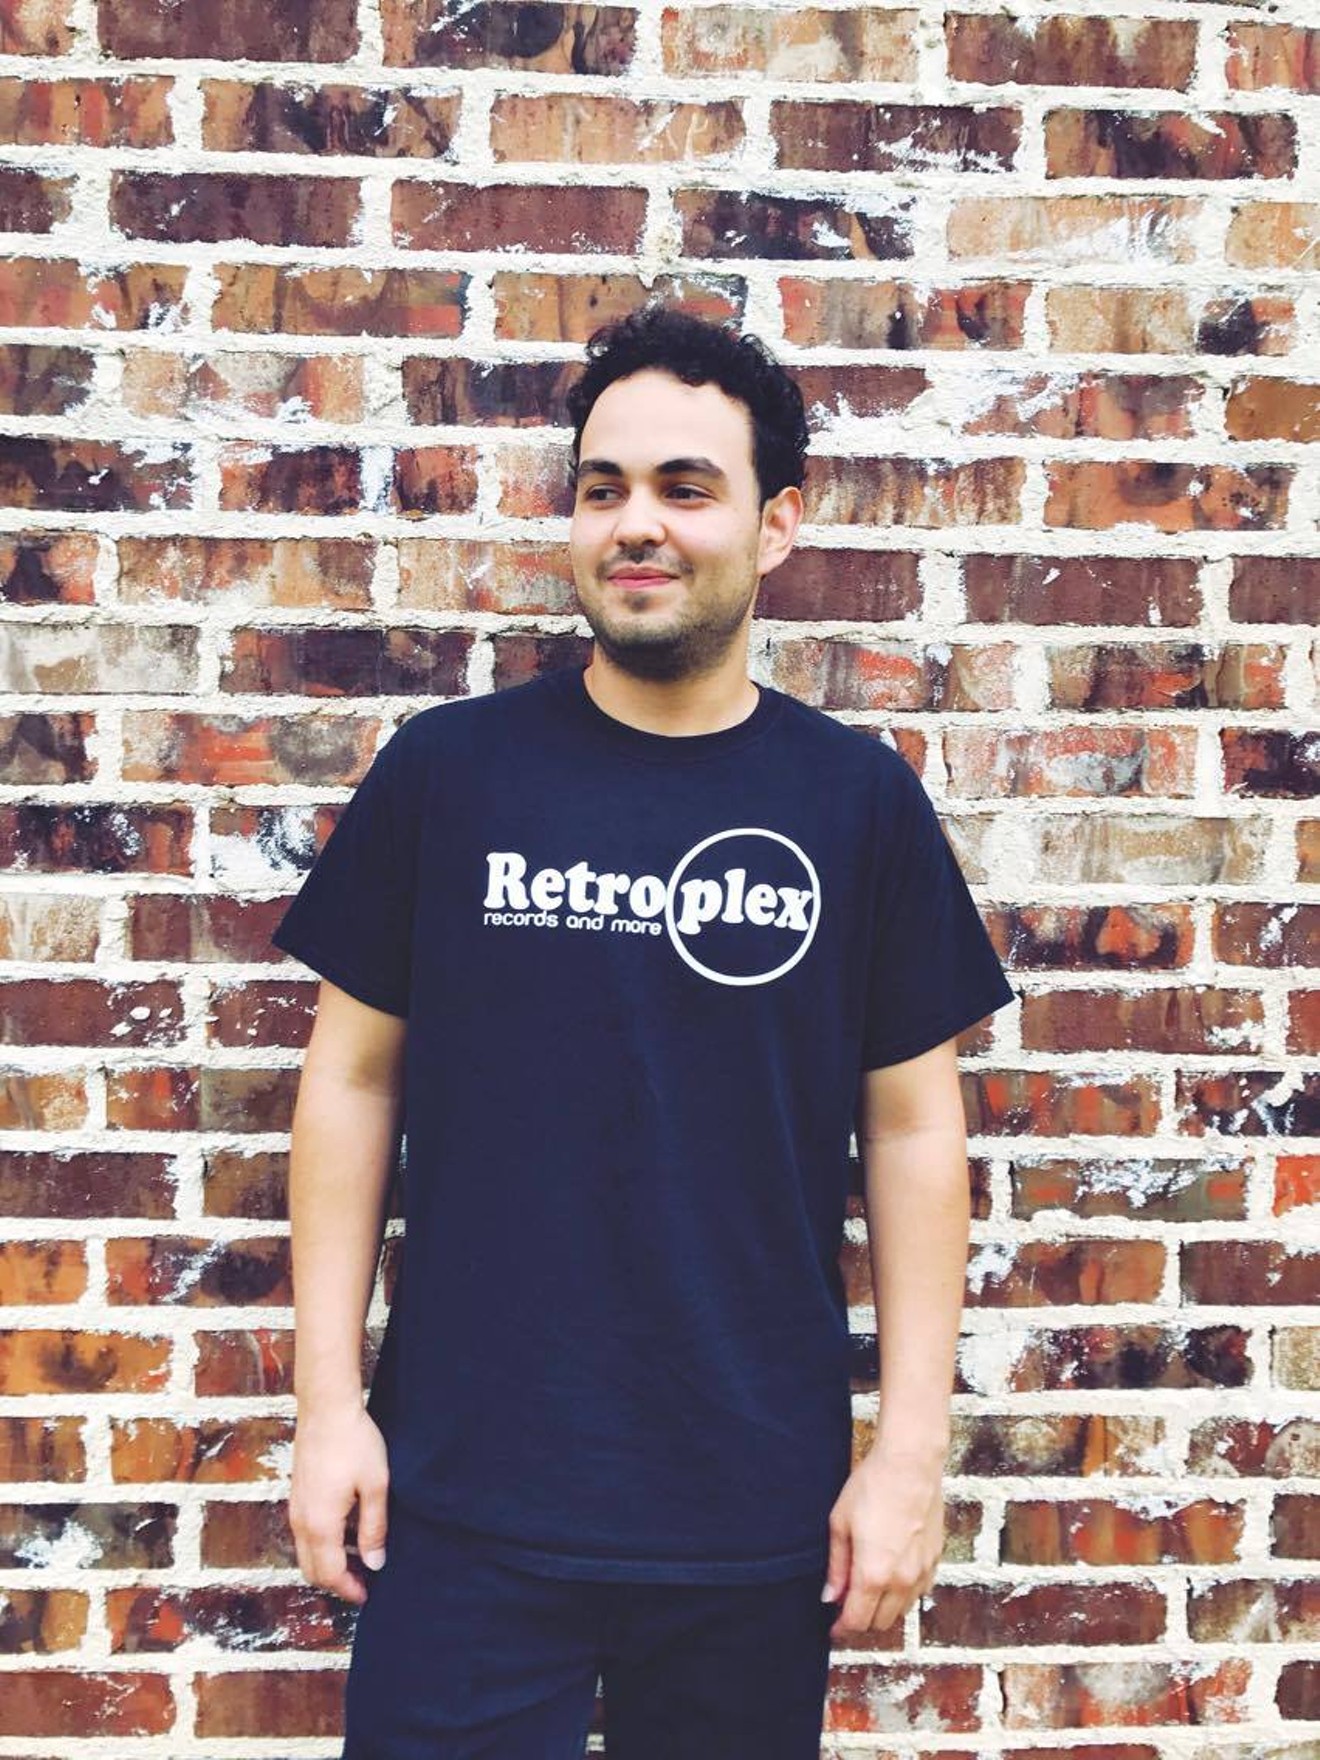 Aidin Hafezamini worked for a year at Garland's Retroplex Records. Now he's settled into the job of audio engineer for Rockit Lab in Deep Ellum.